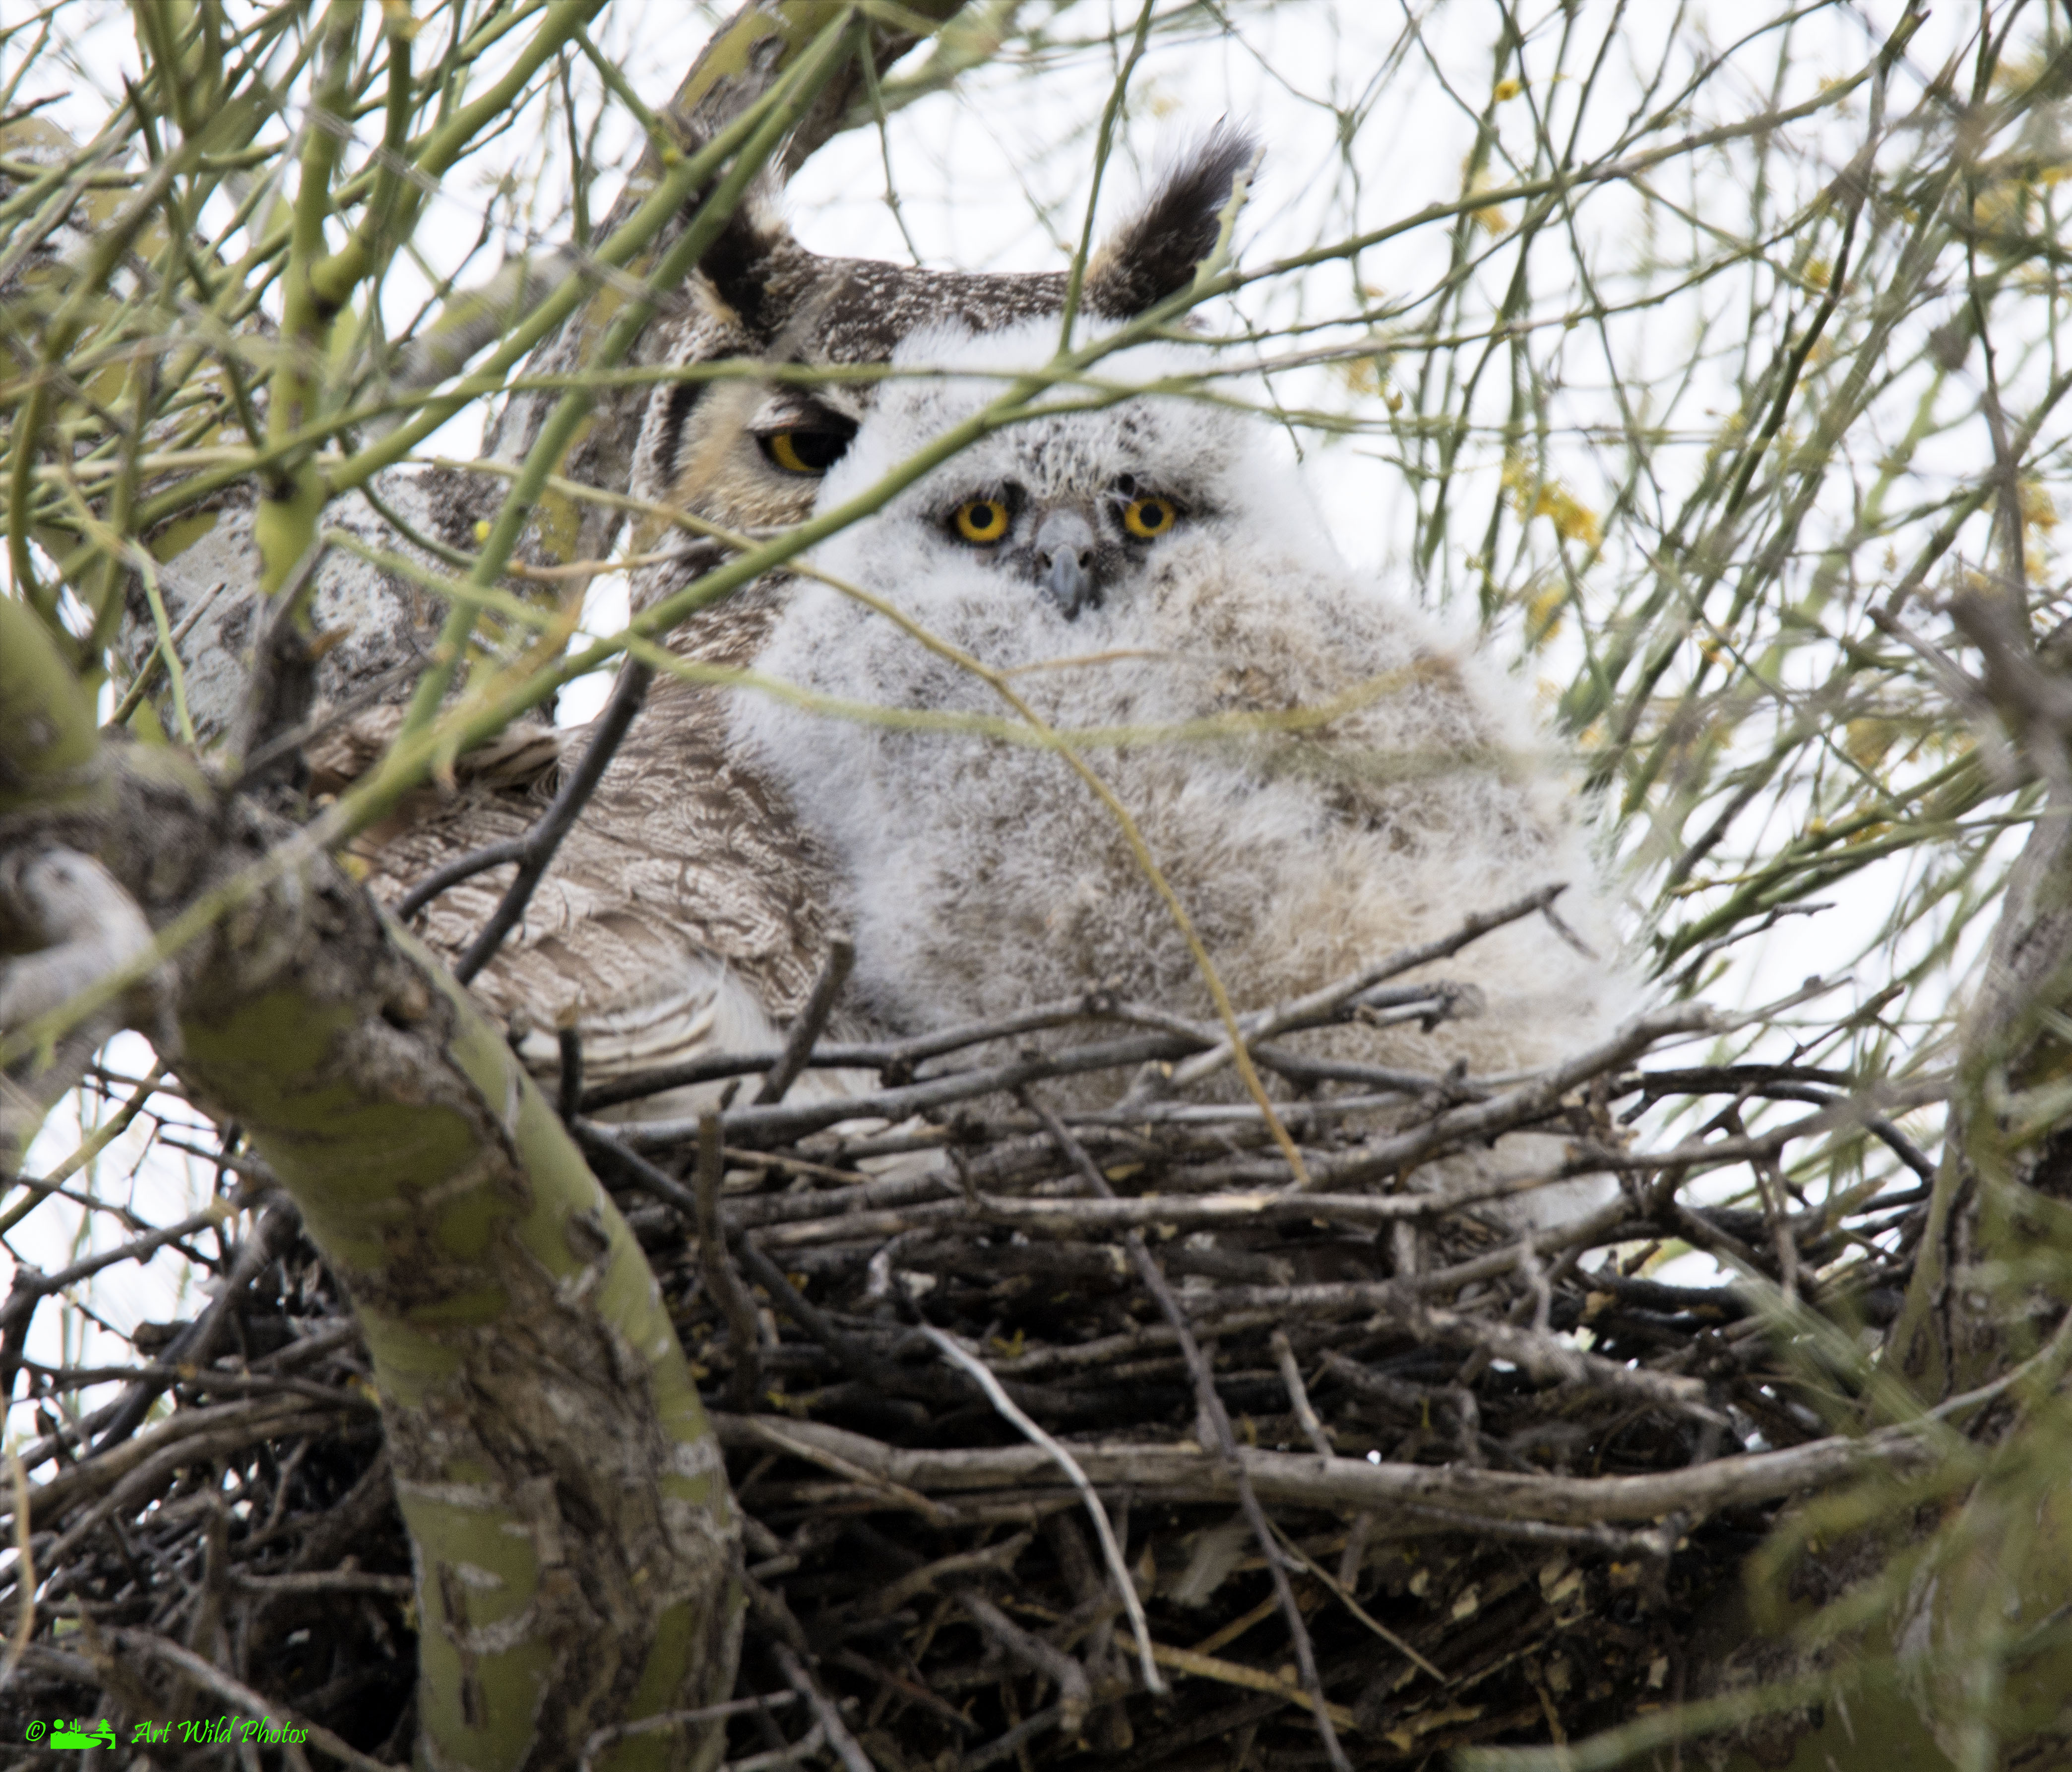 Photo by Karen L West  |  Nesting baby with momma at the back in SNP East.